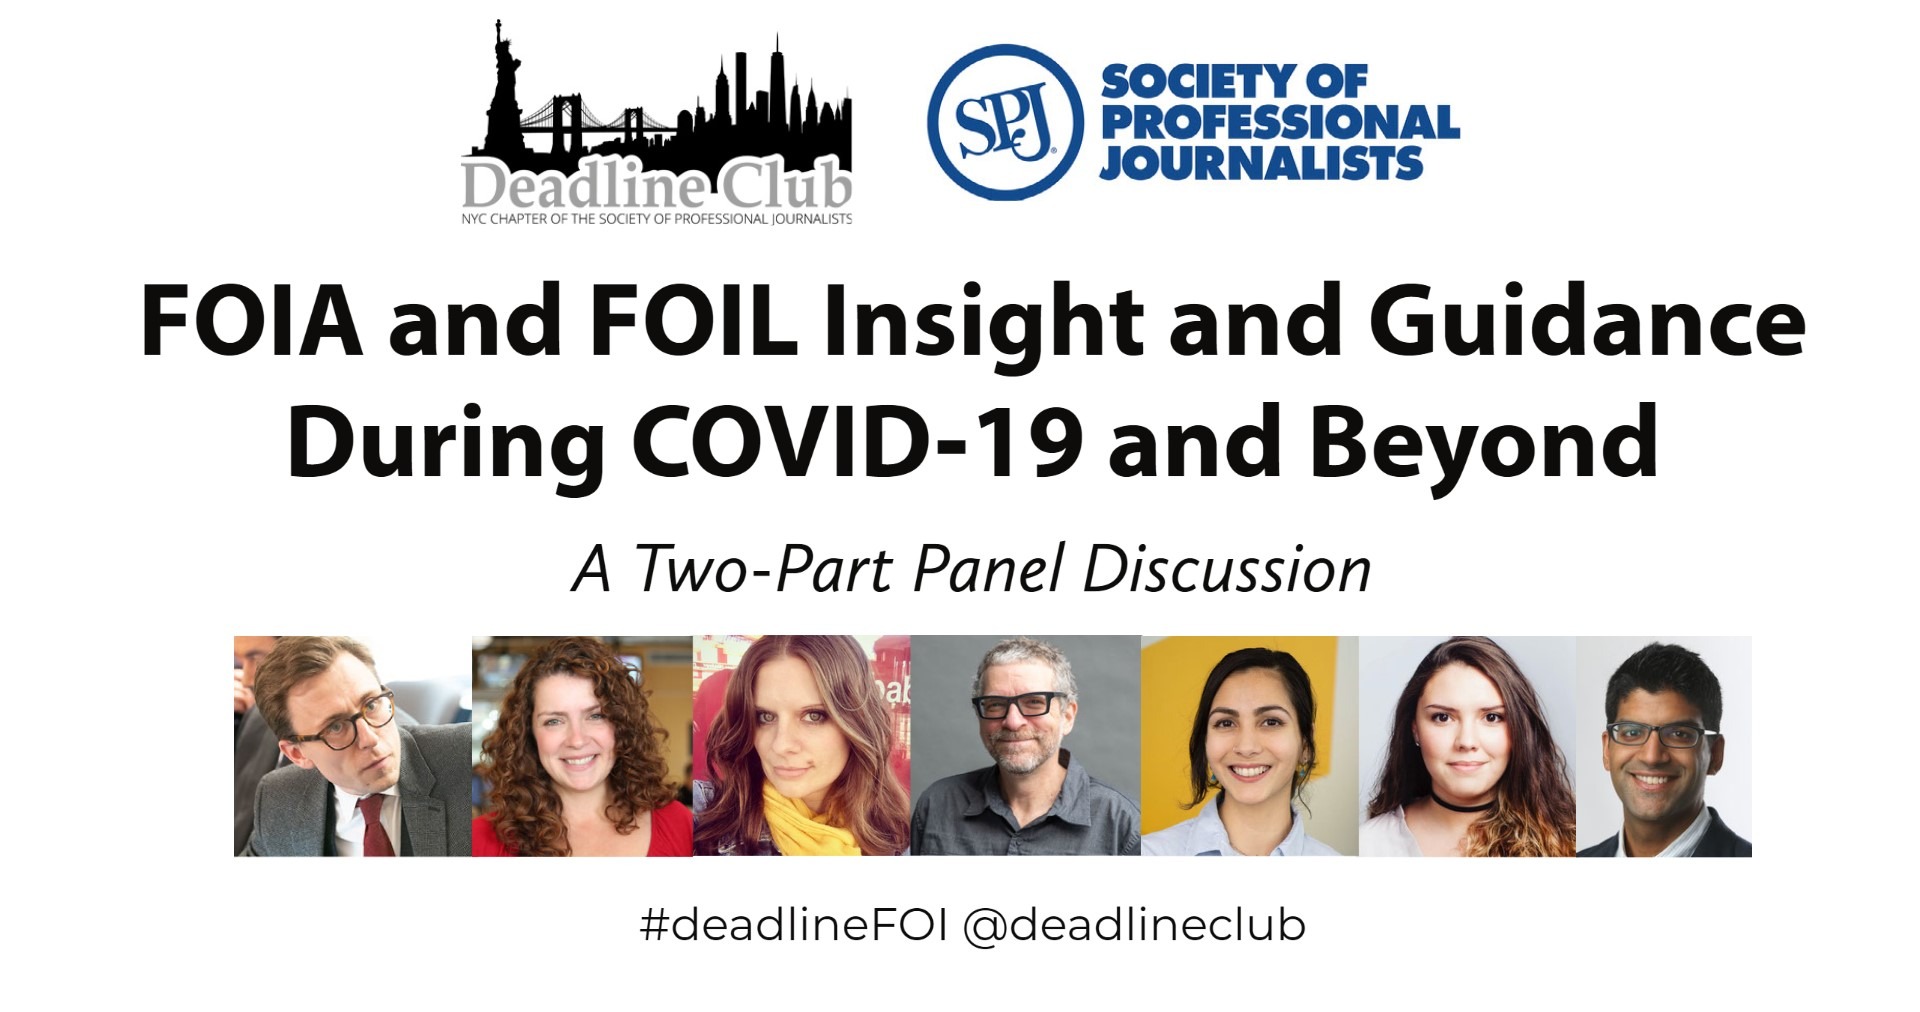 FOIA and FOIL Insight and Guidance During COVID-19 and Beyond – A Two-Part Panel Discussion